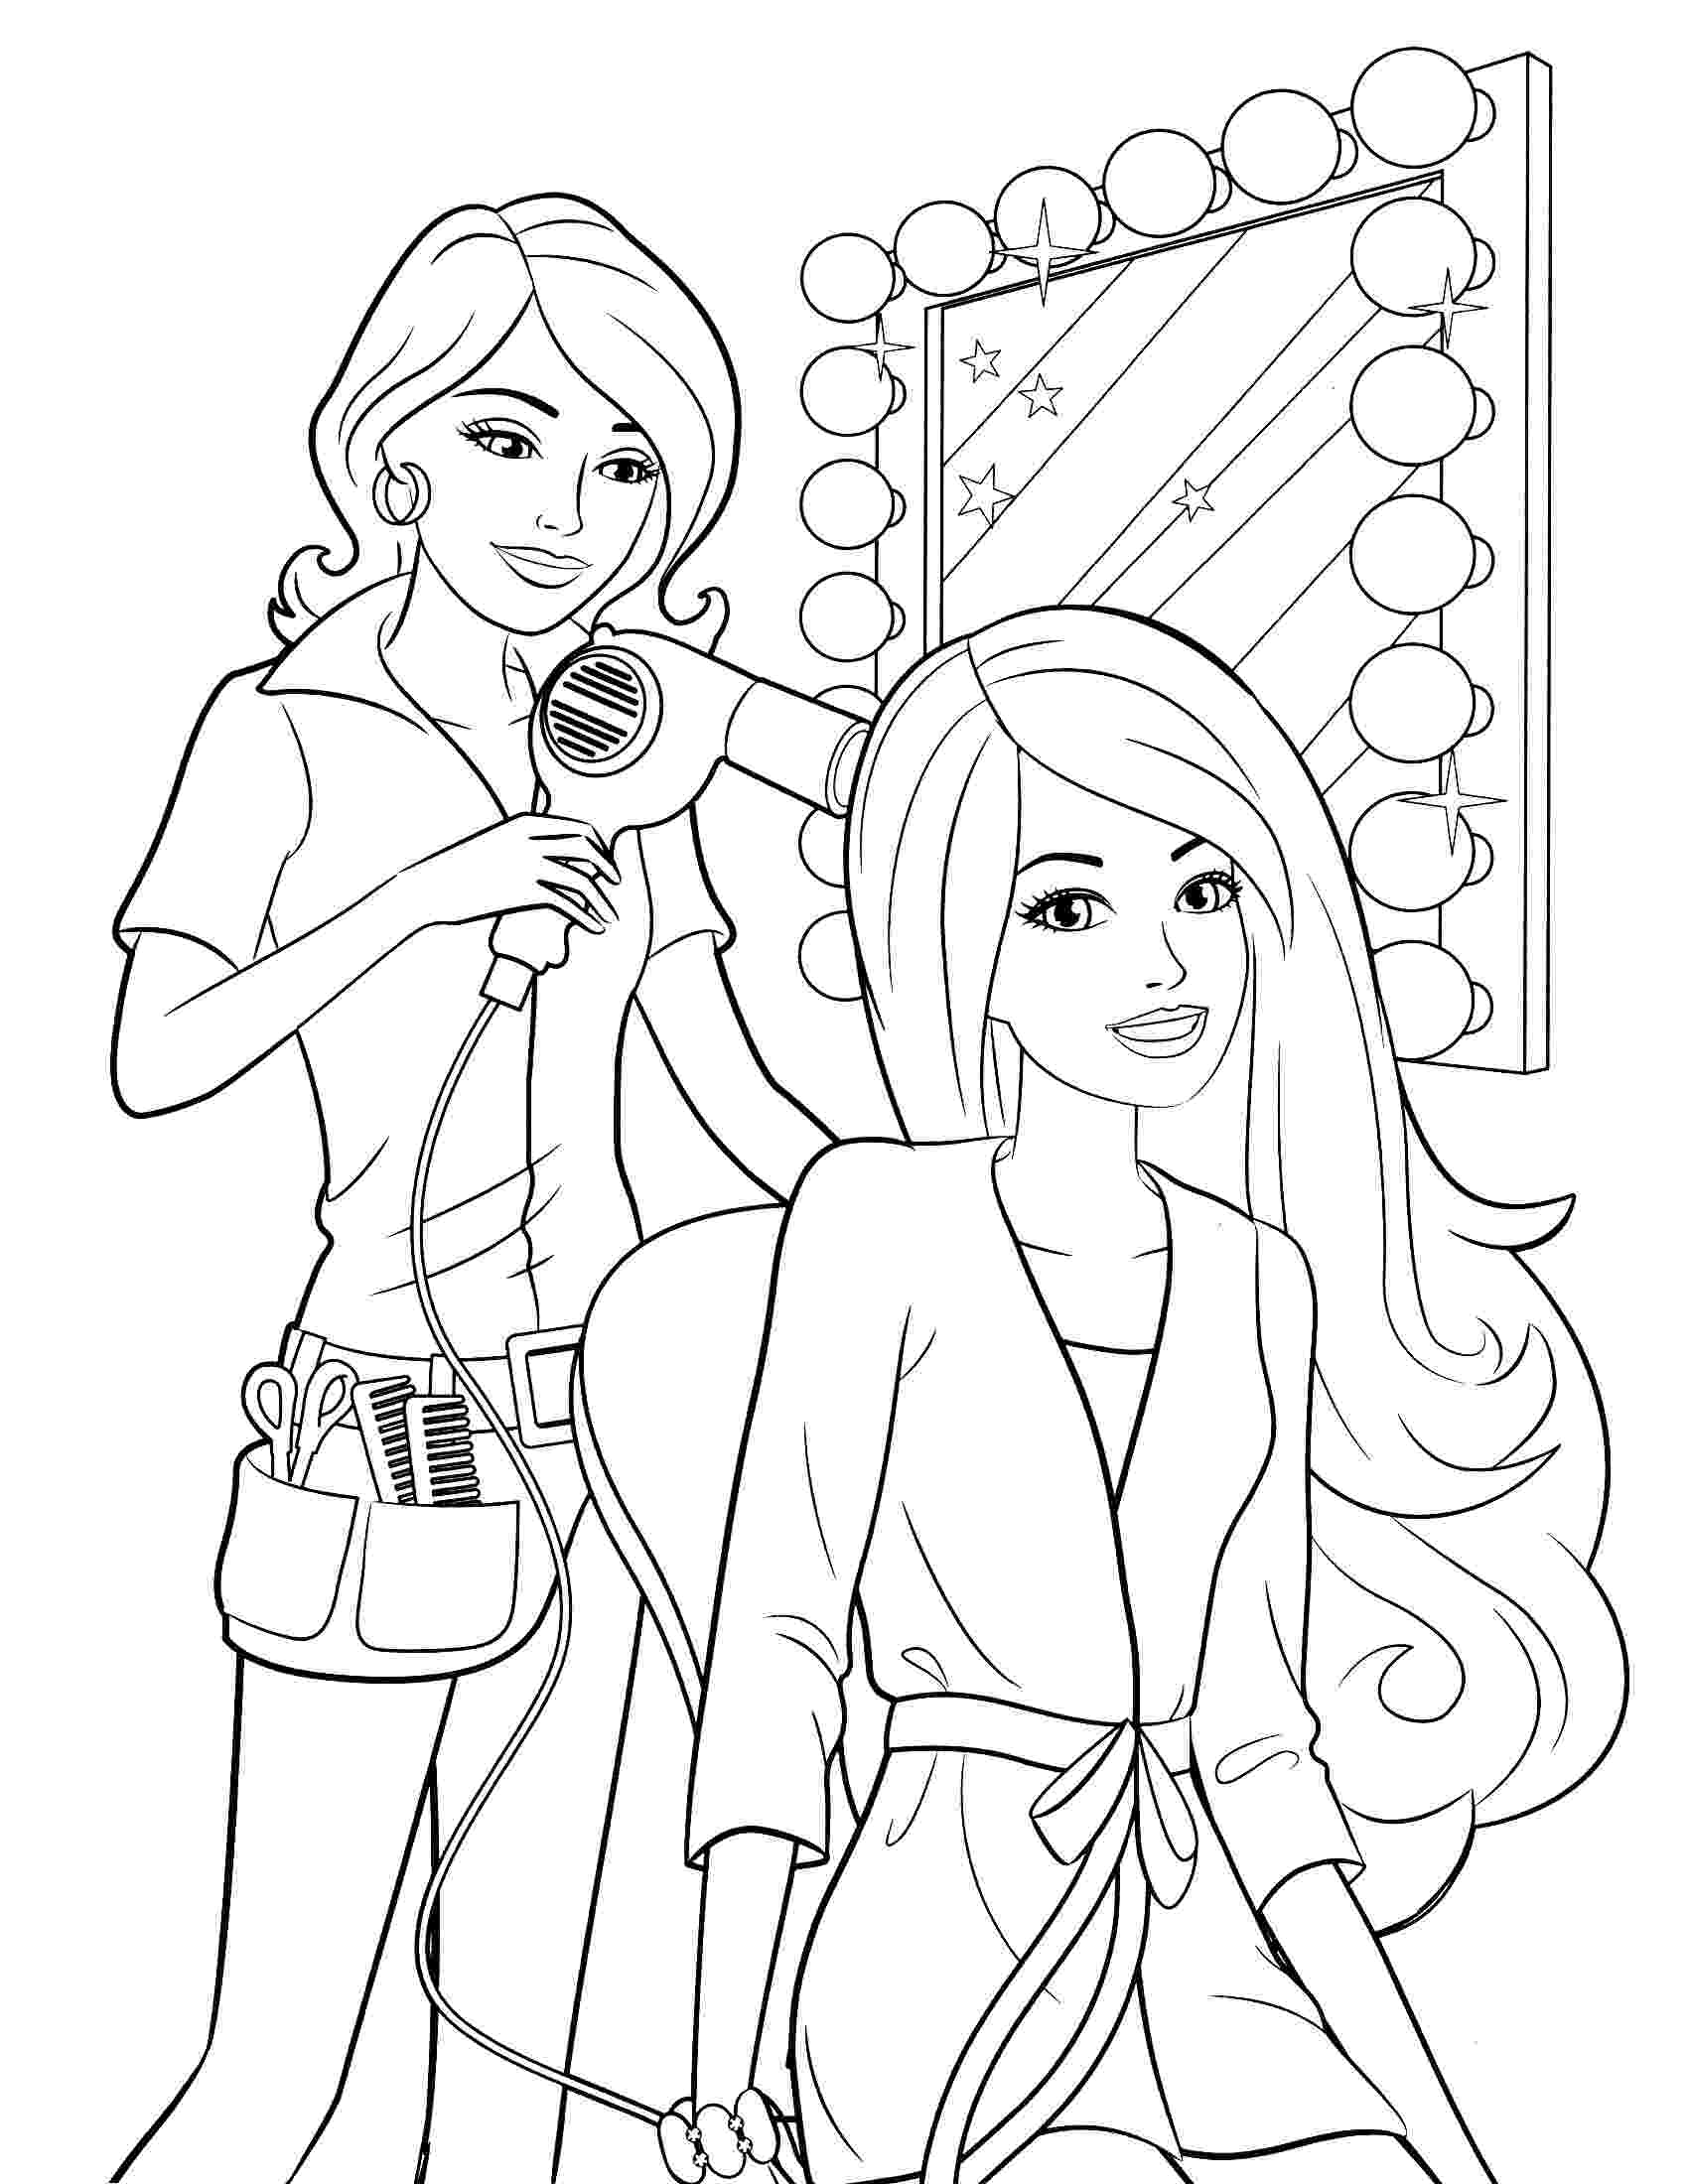 girl colouring pages pretty girls coloring pages free people coloring pages pages colouring girl 